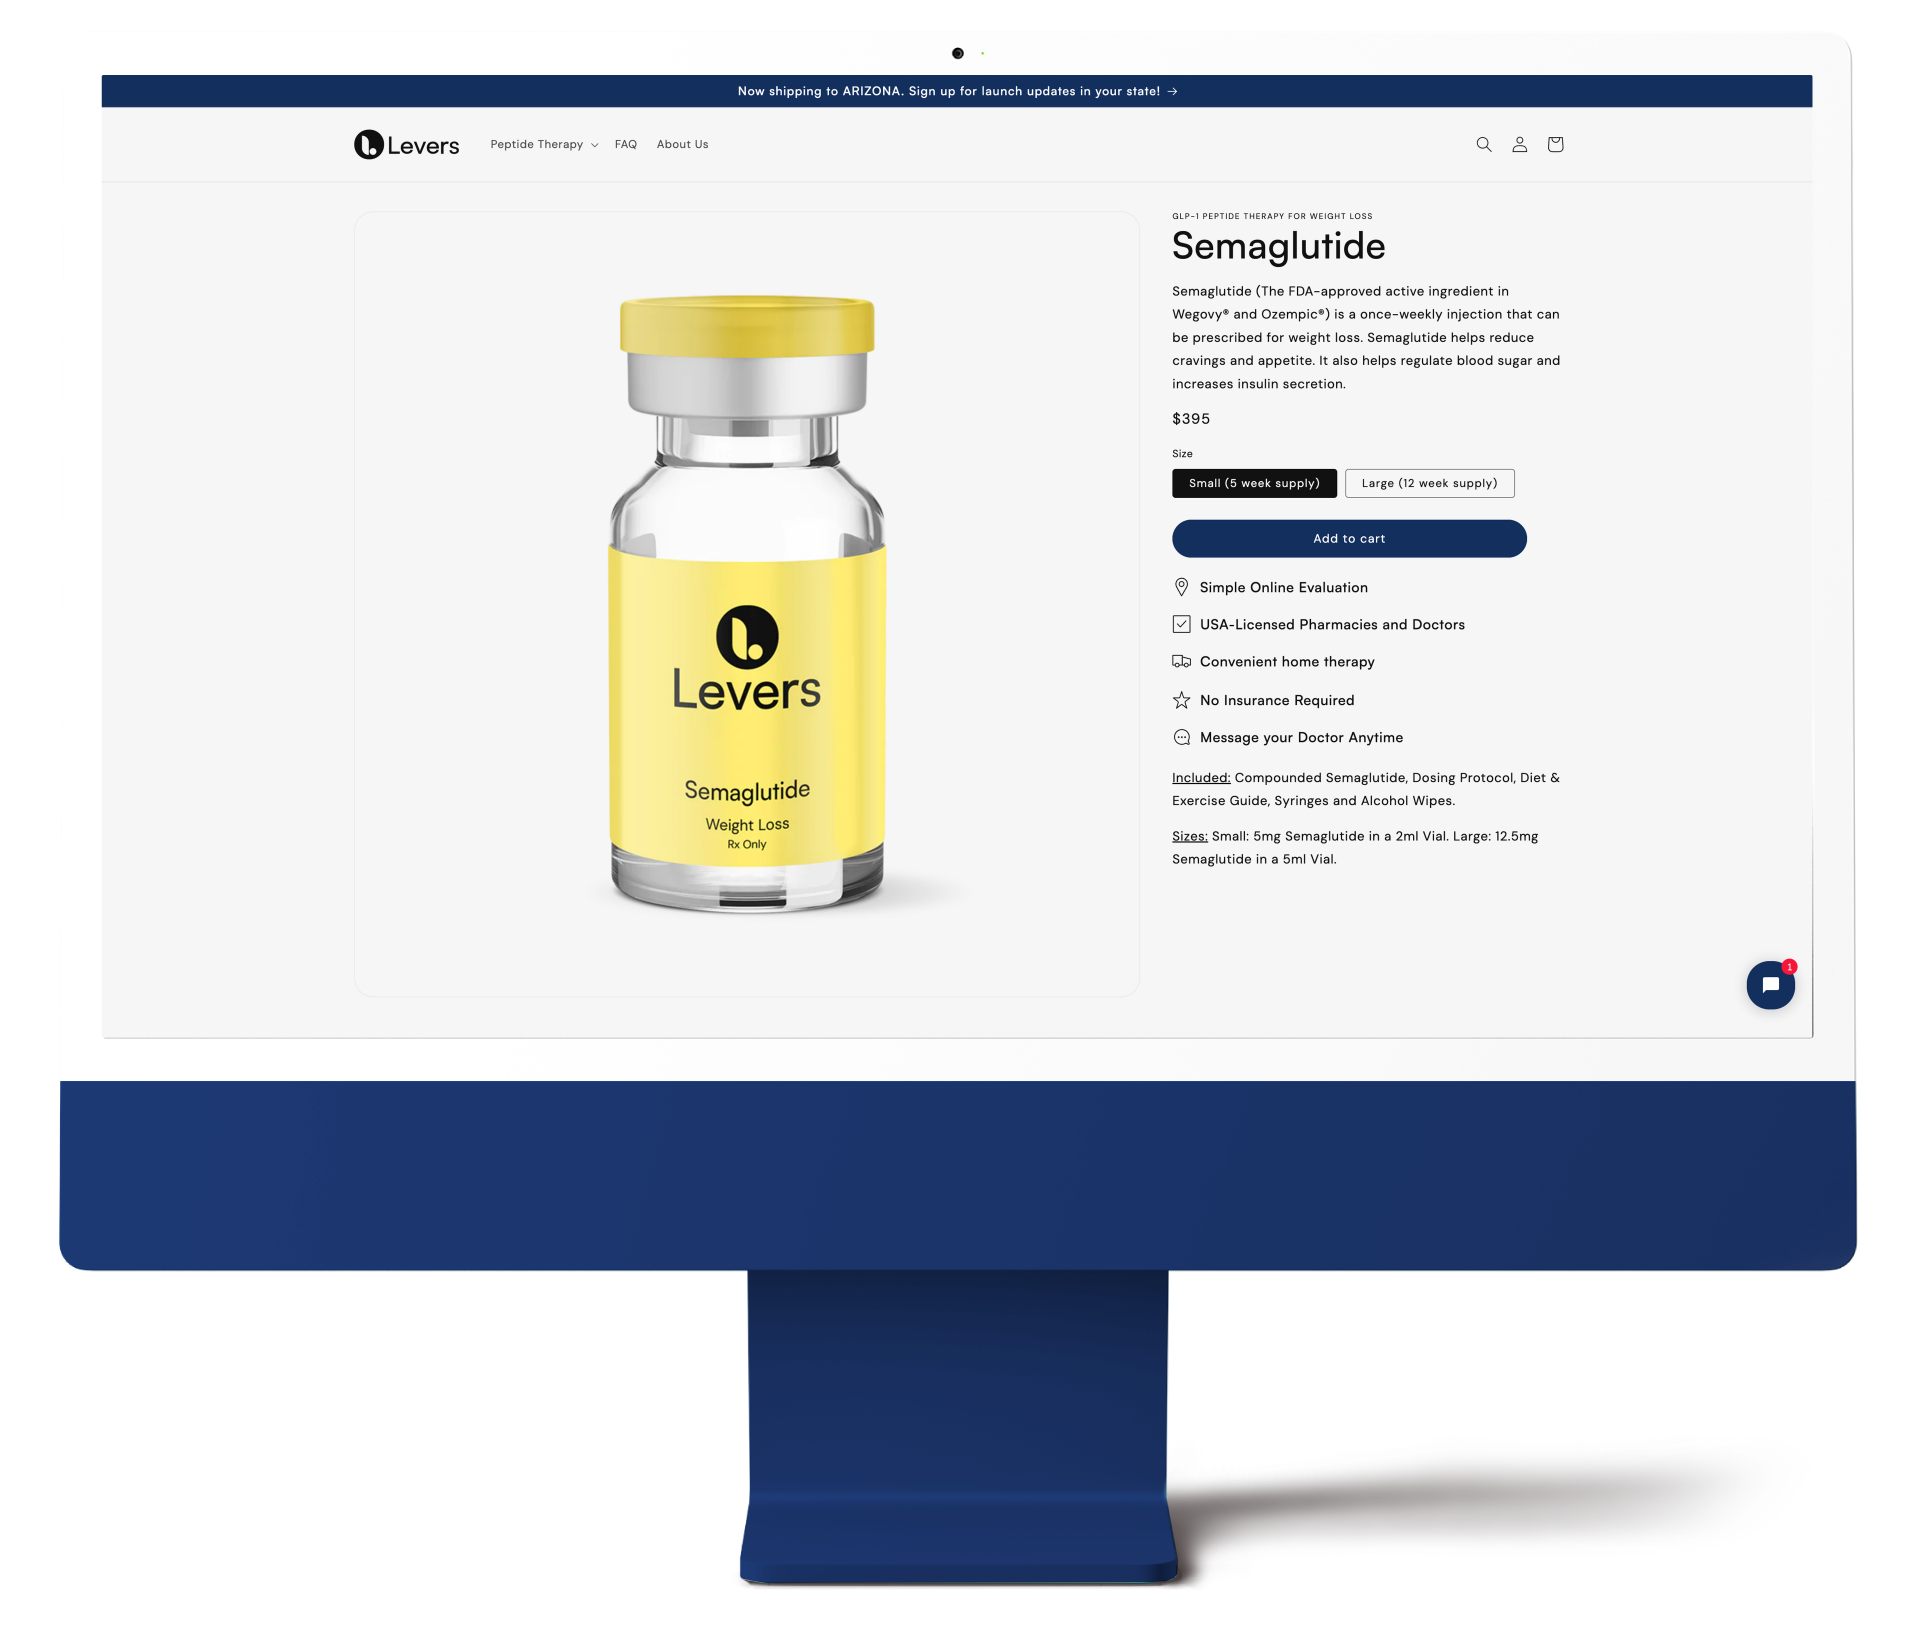 Levers Health Telehealth Peptide Supplement Shopify eCommerce Website Shopping Cart with Checkout Process